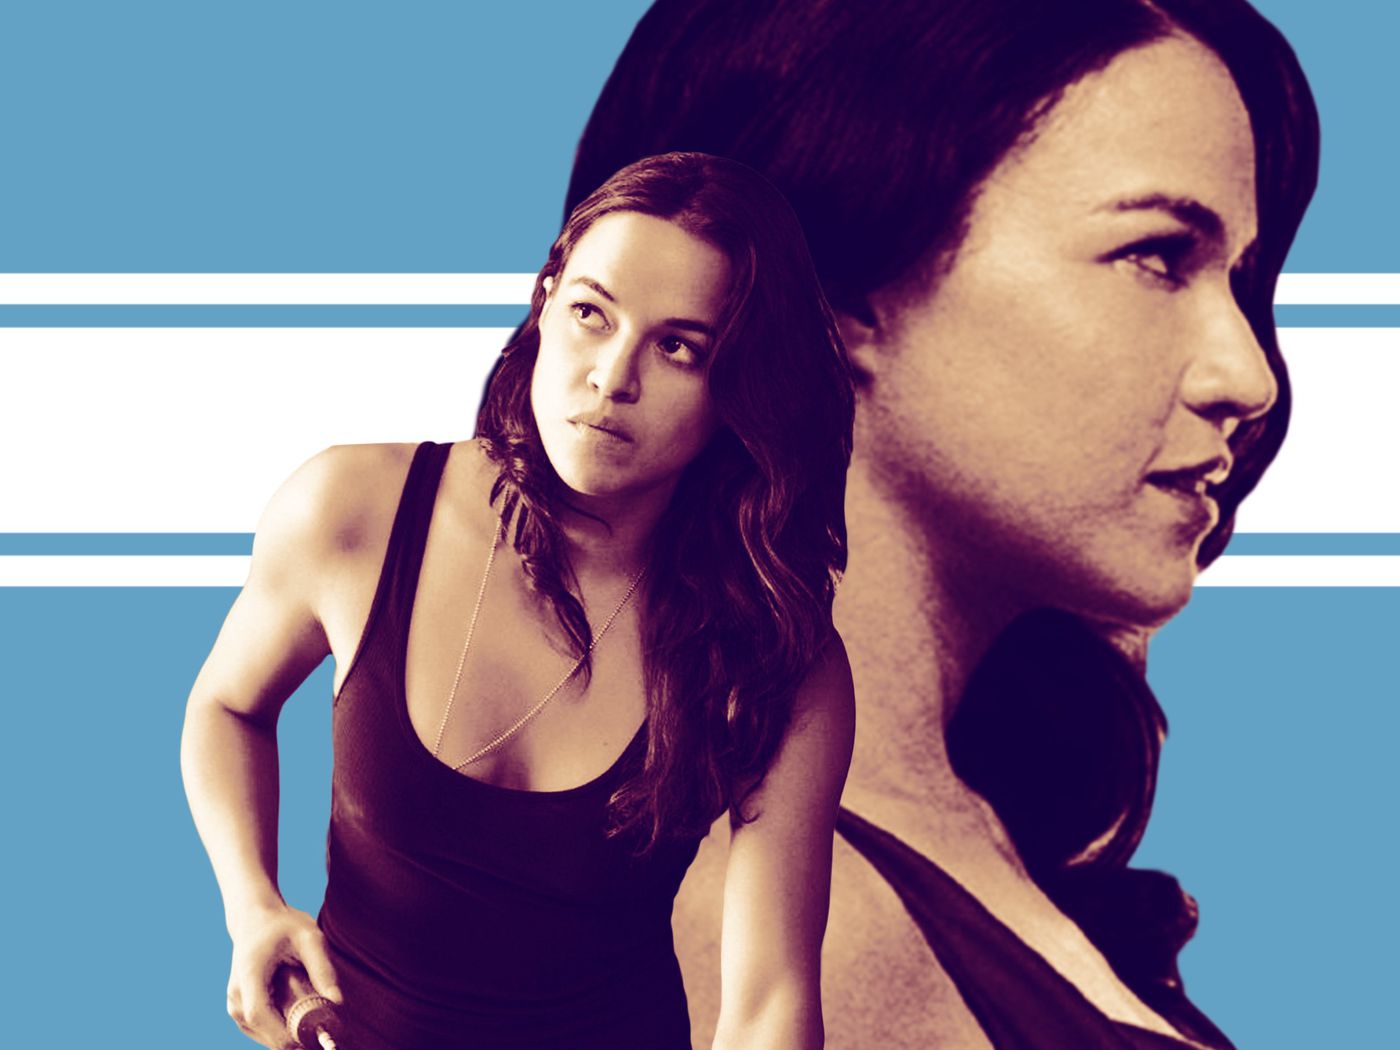 An Ode to Letty Ortiz, the Secret MVP of the 'Fast & Furious' Franchise